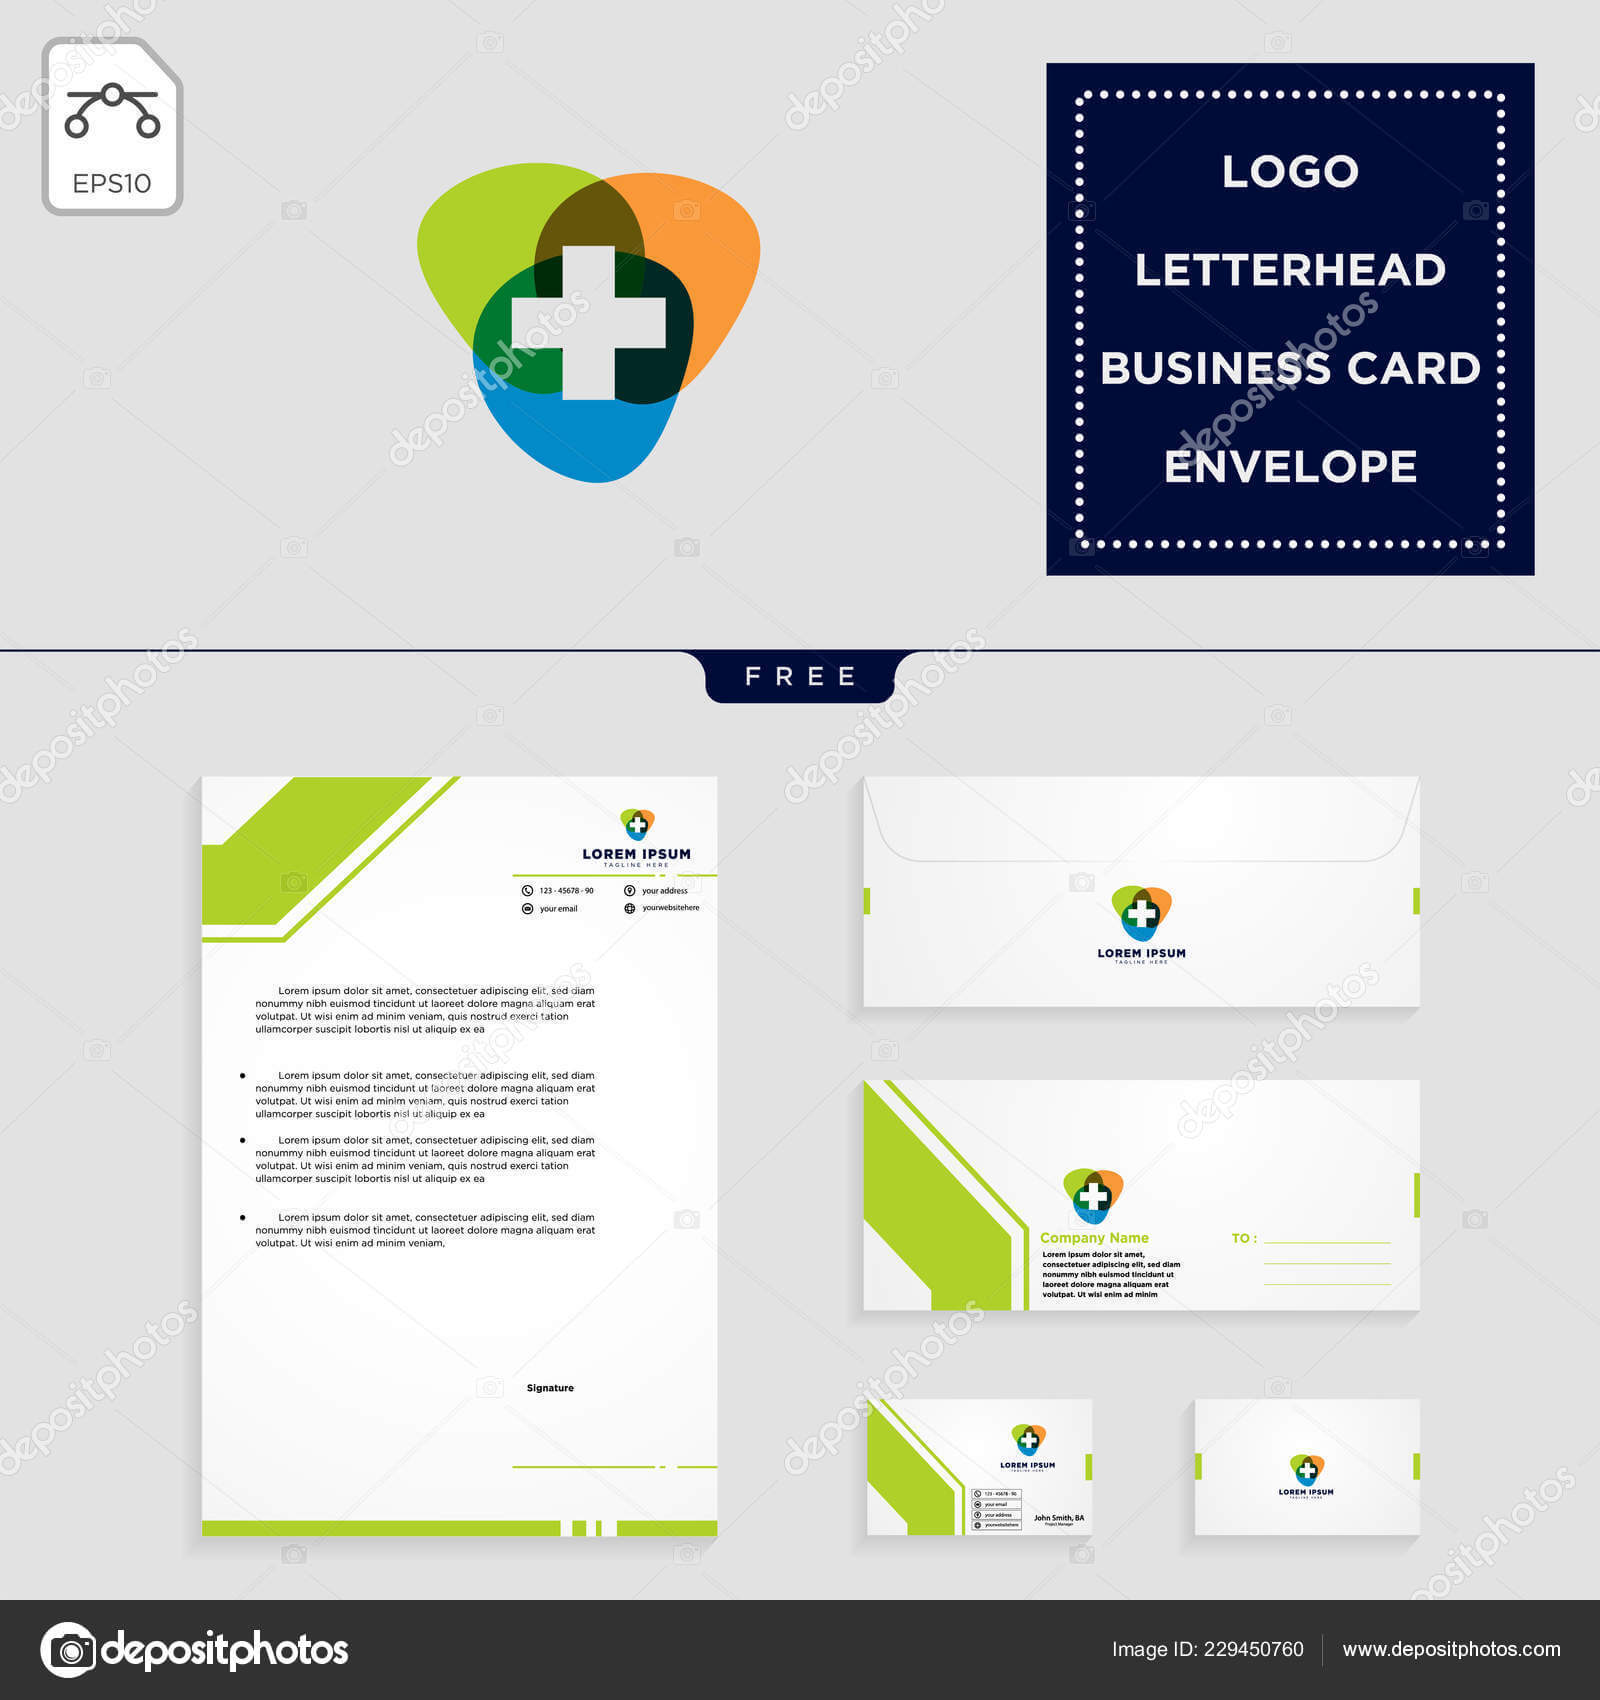 Medical Cross Logo Template Vector Illustration Free With Business Card Letterhead Envelope Template